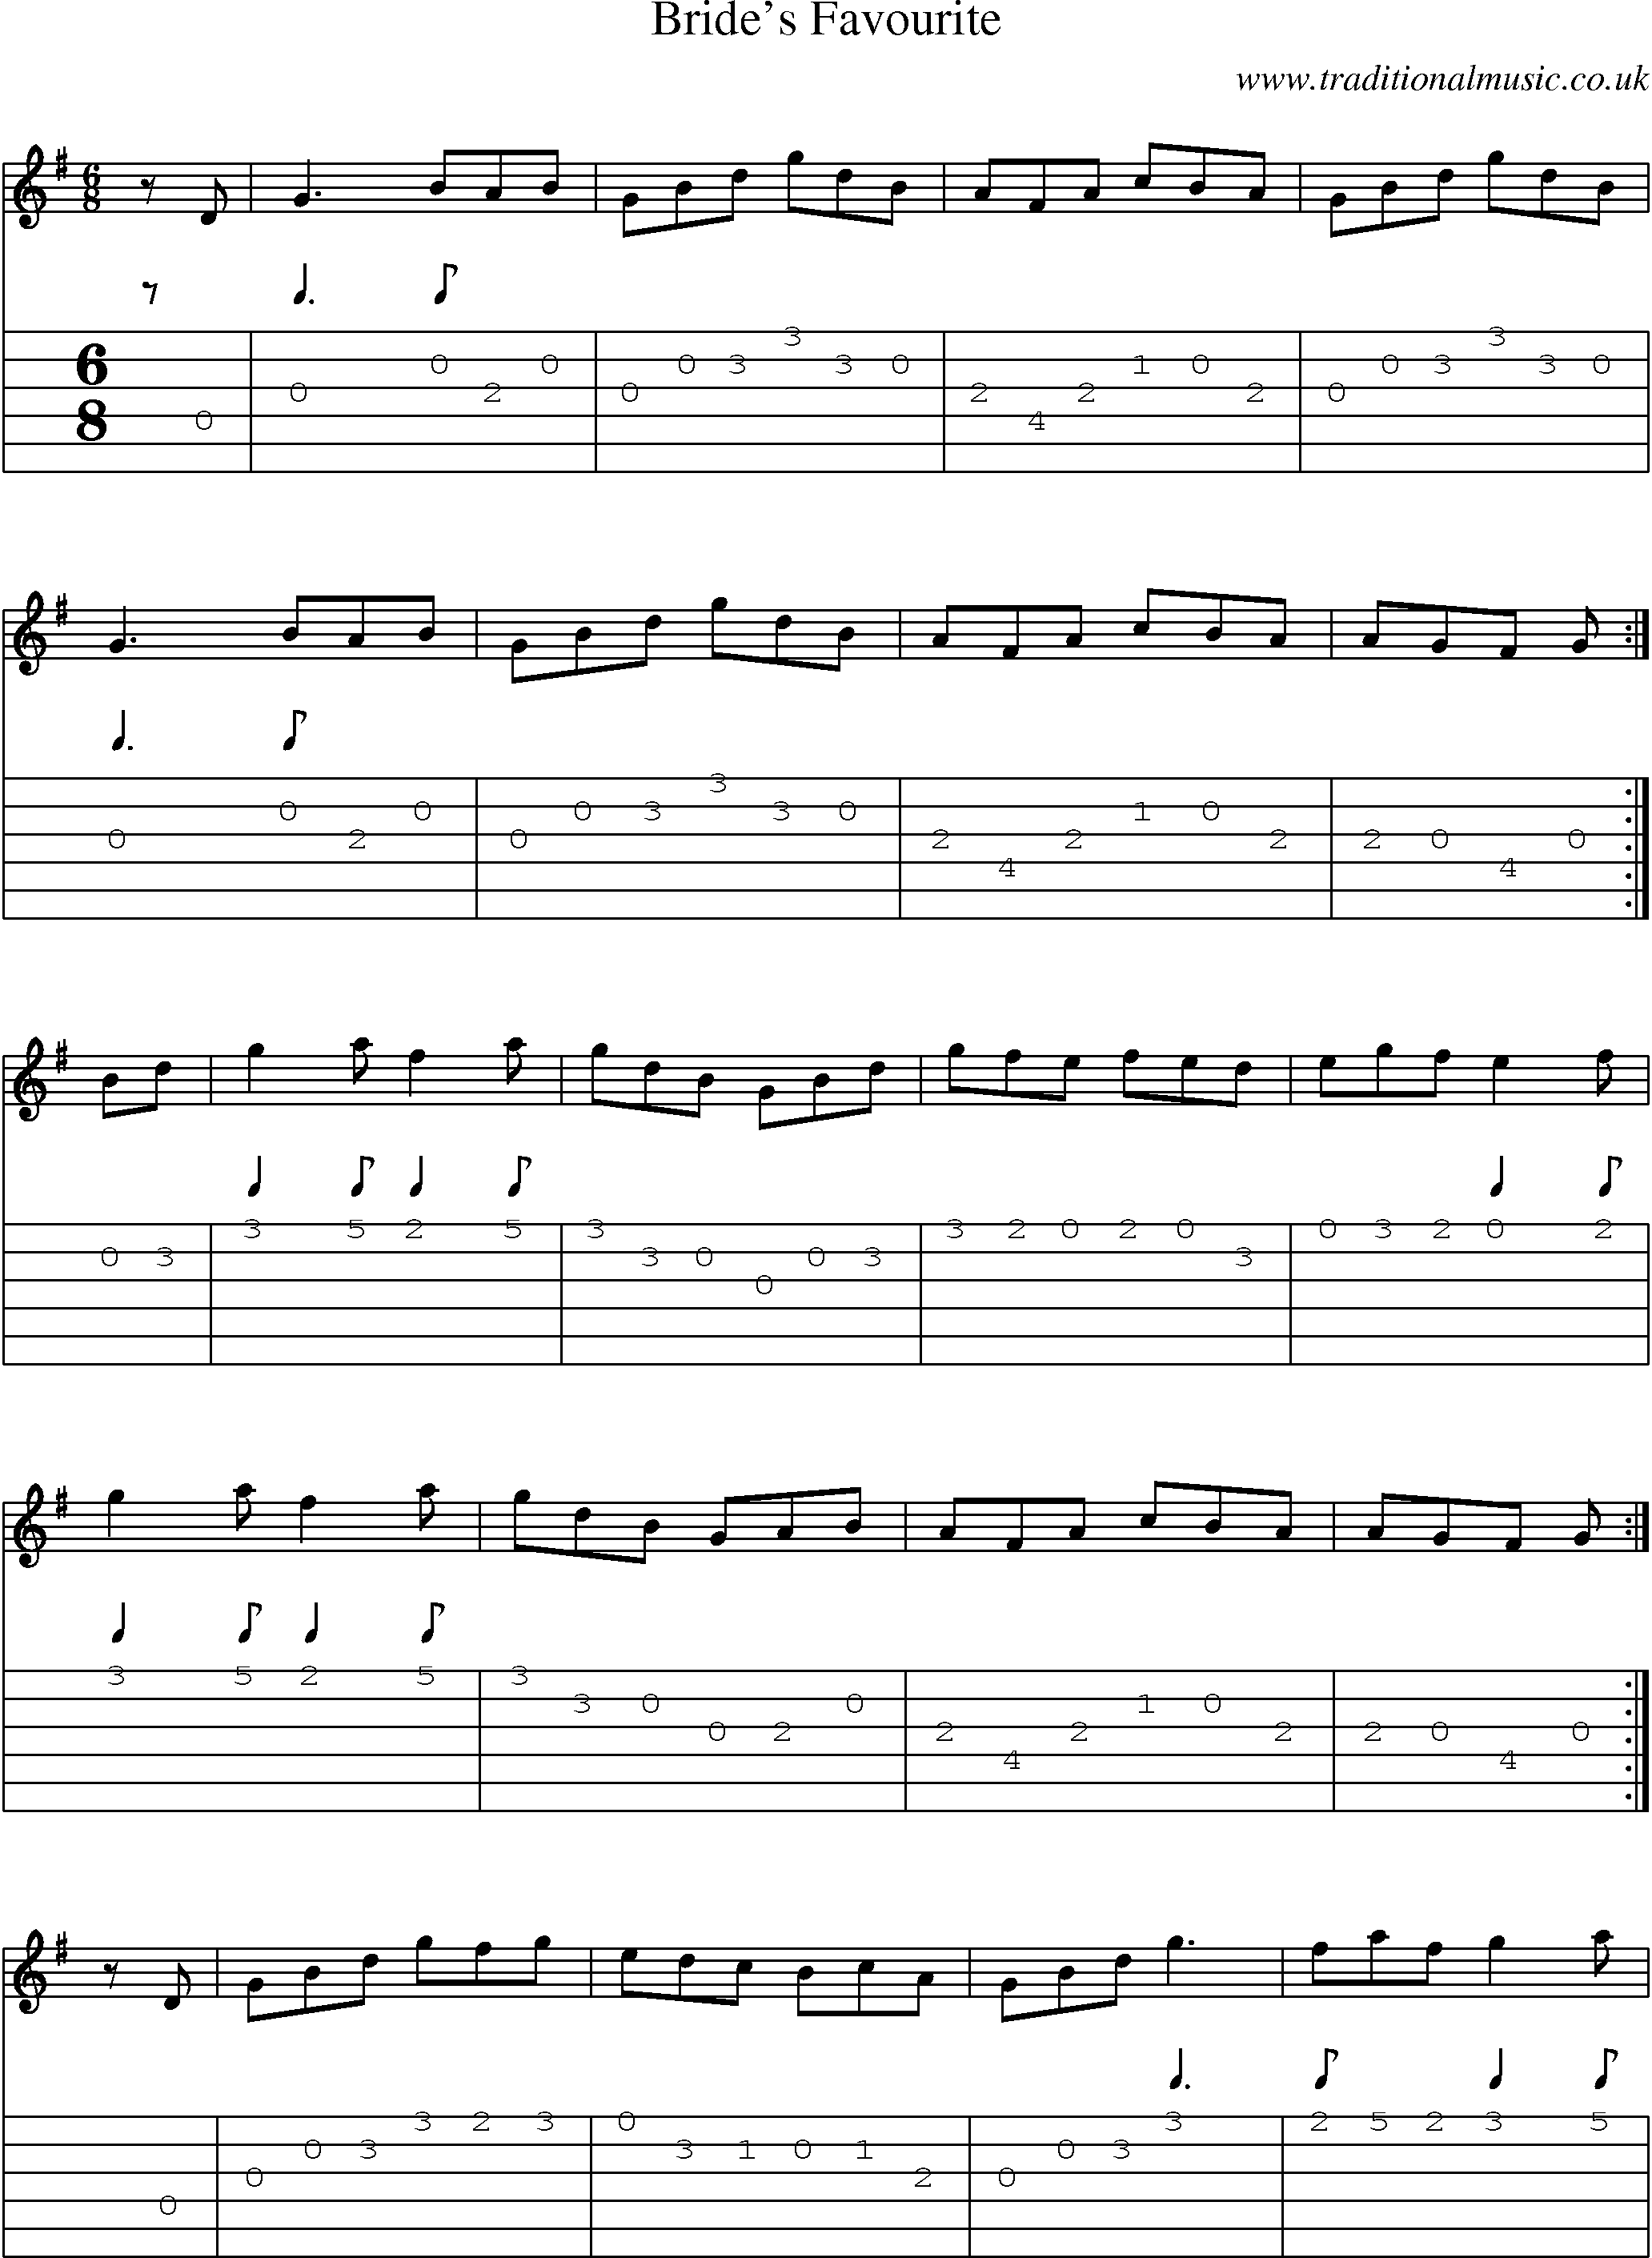 Music Score and Guitar Tabs for Brides Favourite